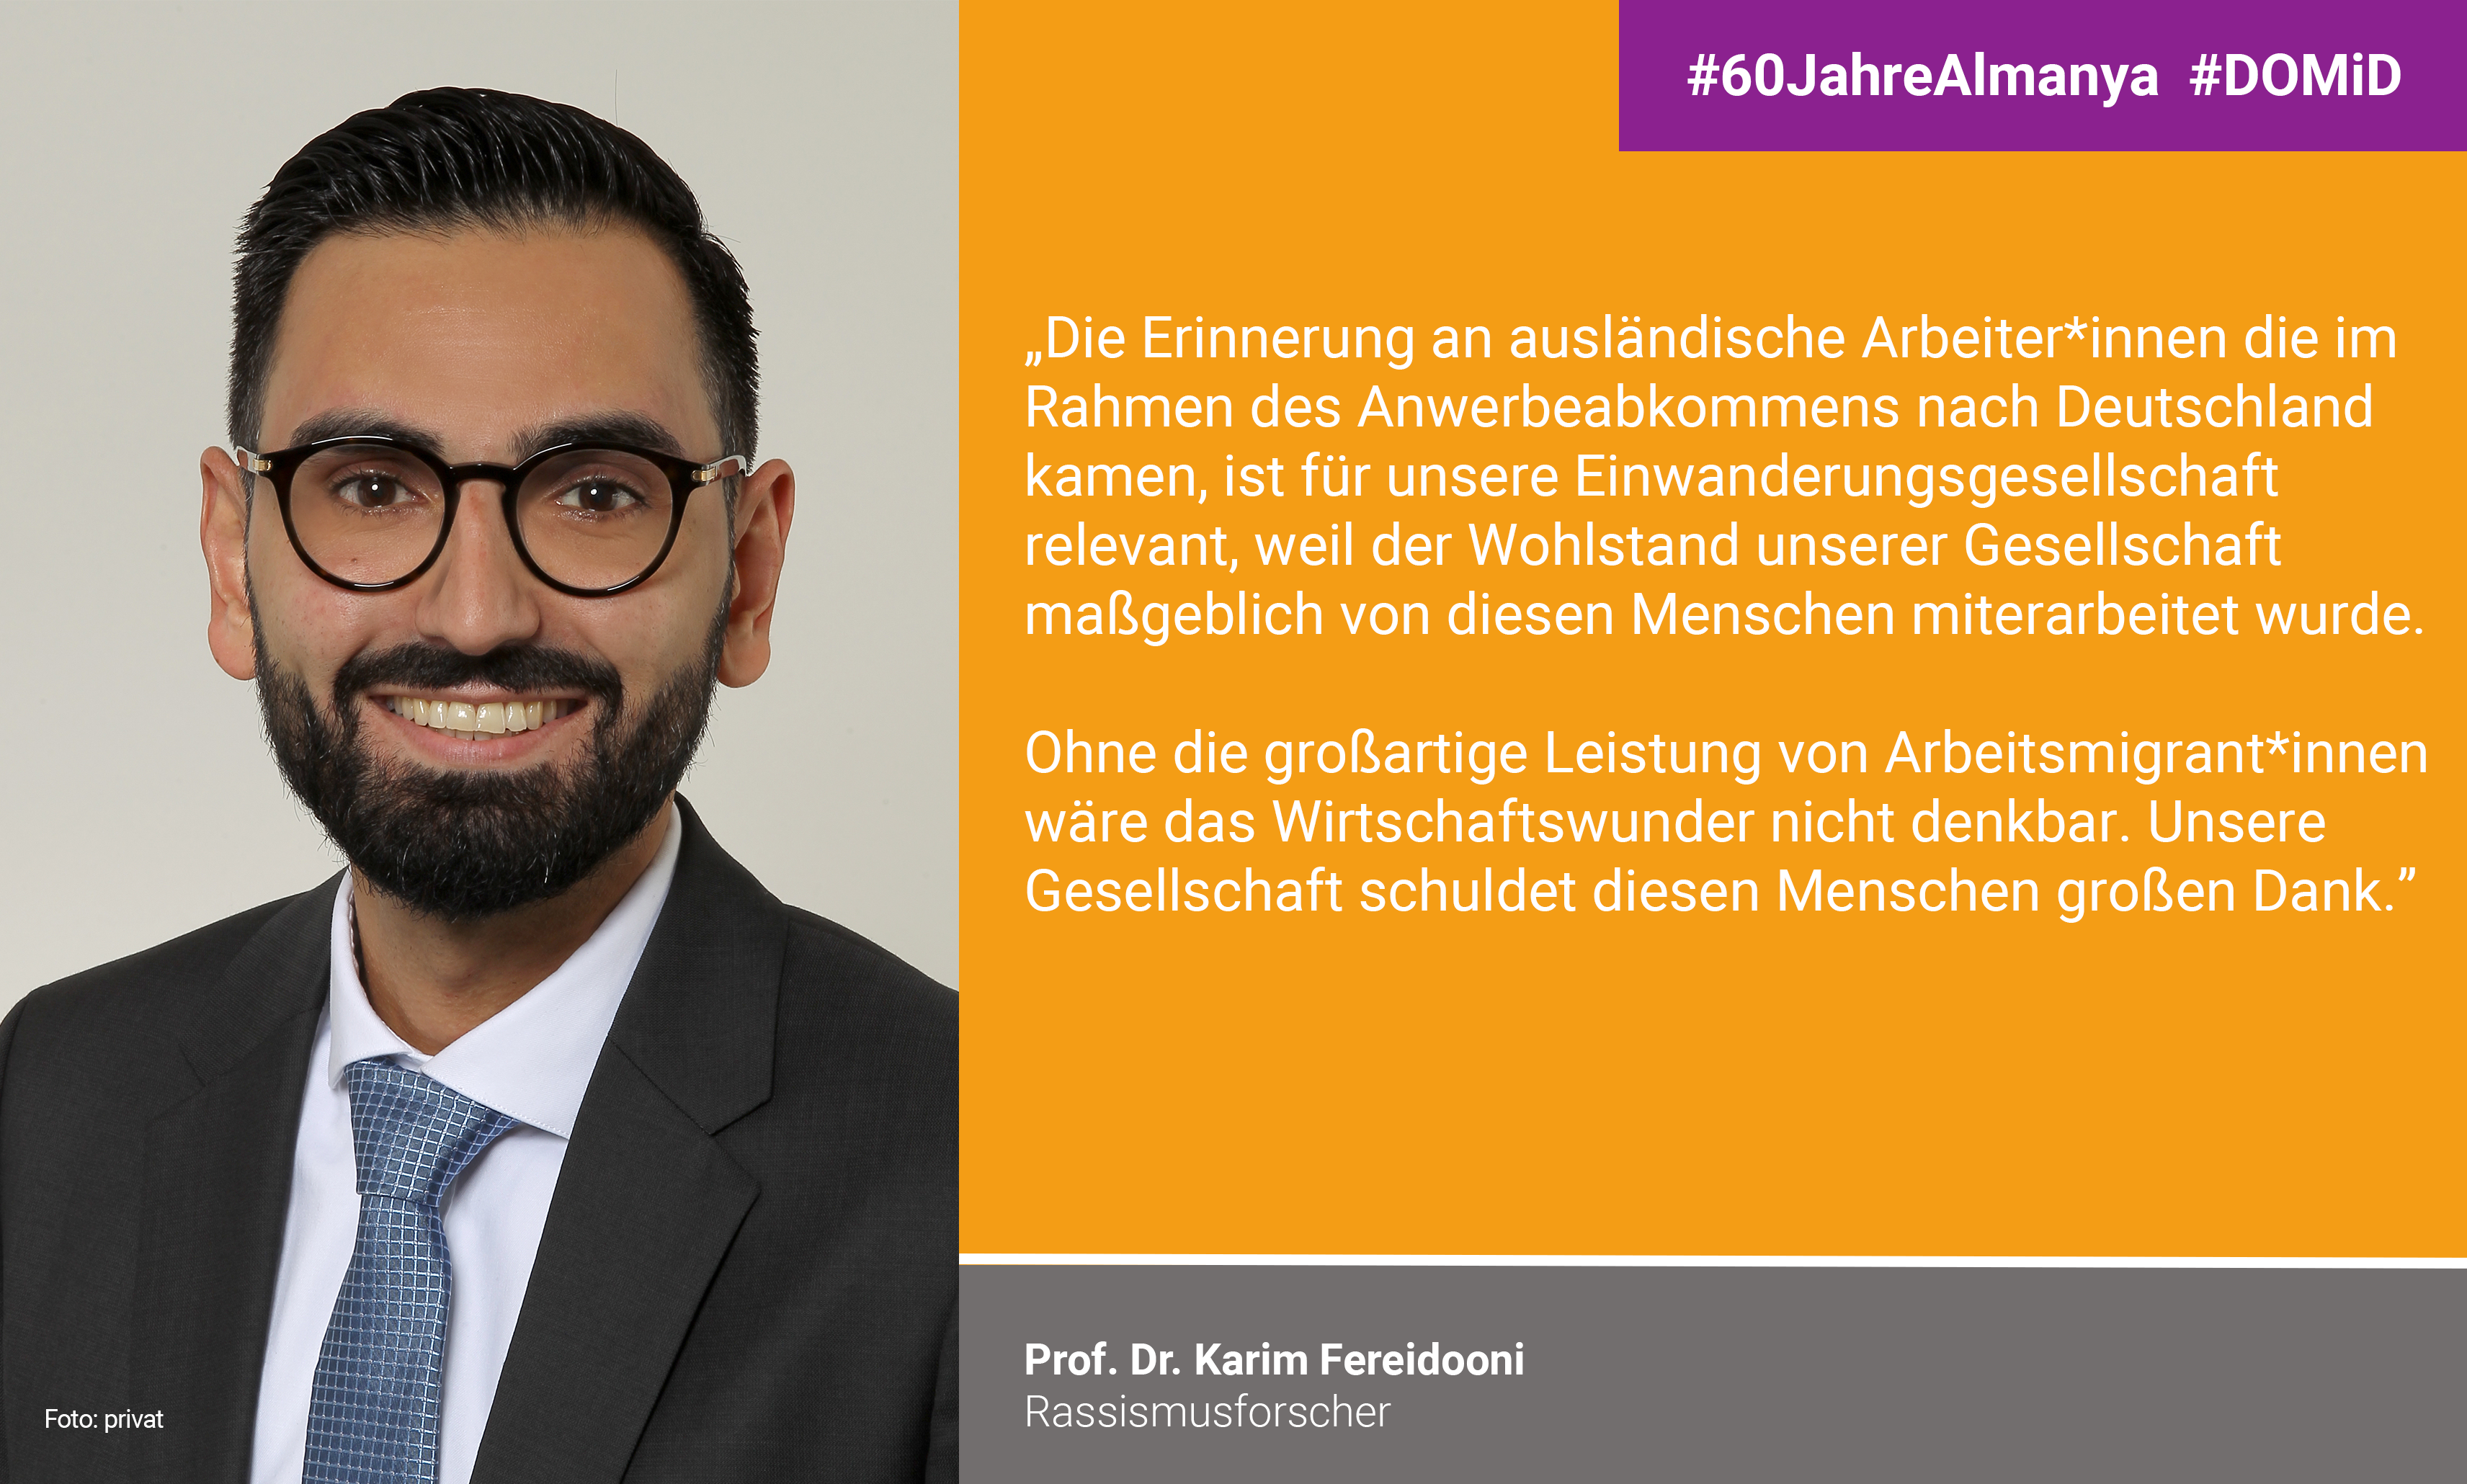 Prof. Dr. Karim Fereidooni: "The memory of foreign workers who came to Germany as part of the recruitment agreement is relevant for our immigration society, because the prosperity of our society was largely created by these people.   Without the great achievements of migrant workers, the economic miracle would have been inconceivable. Our society owes these people a great debt of gratitude."